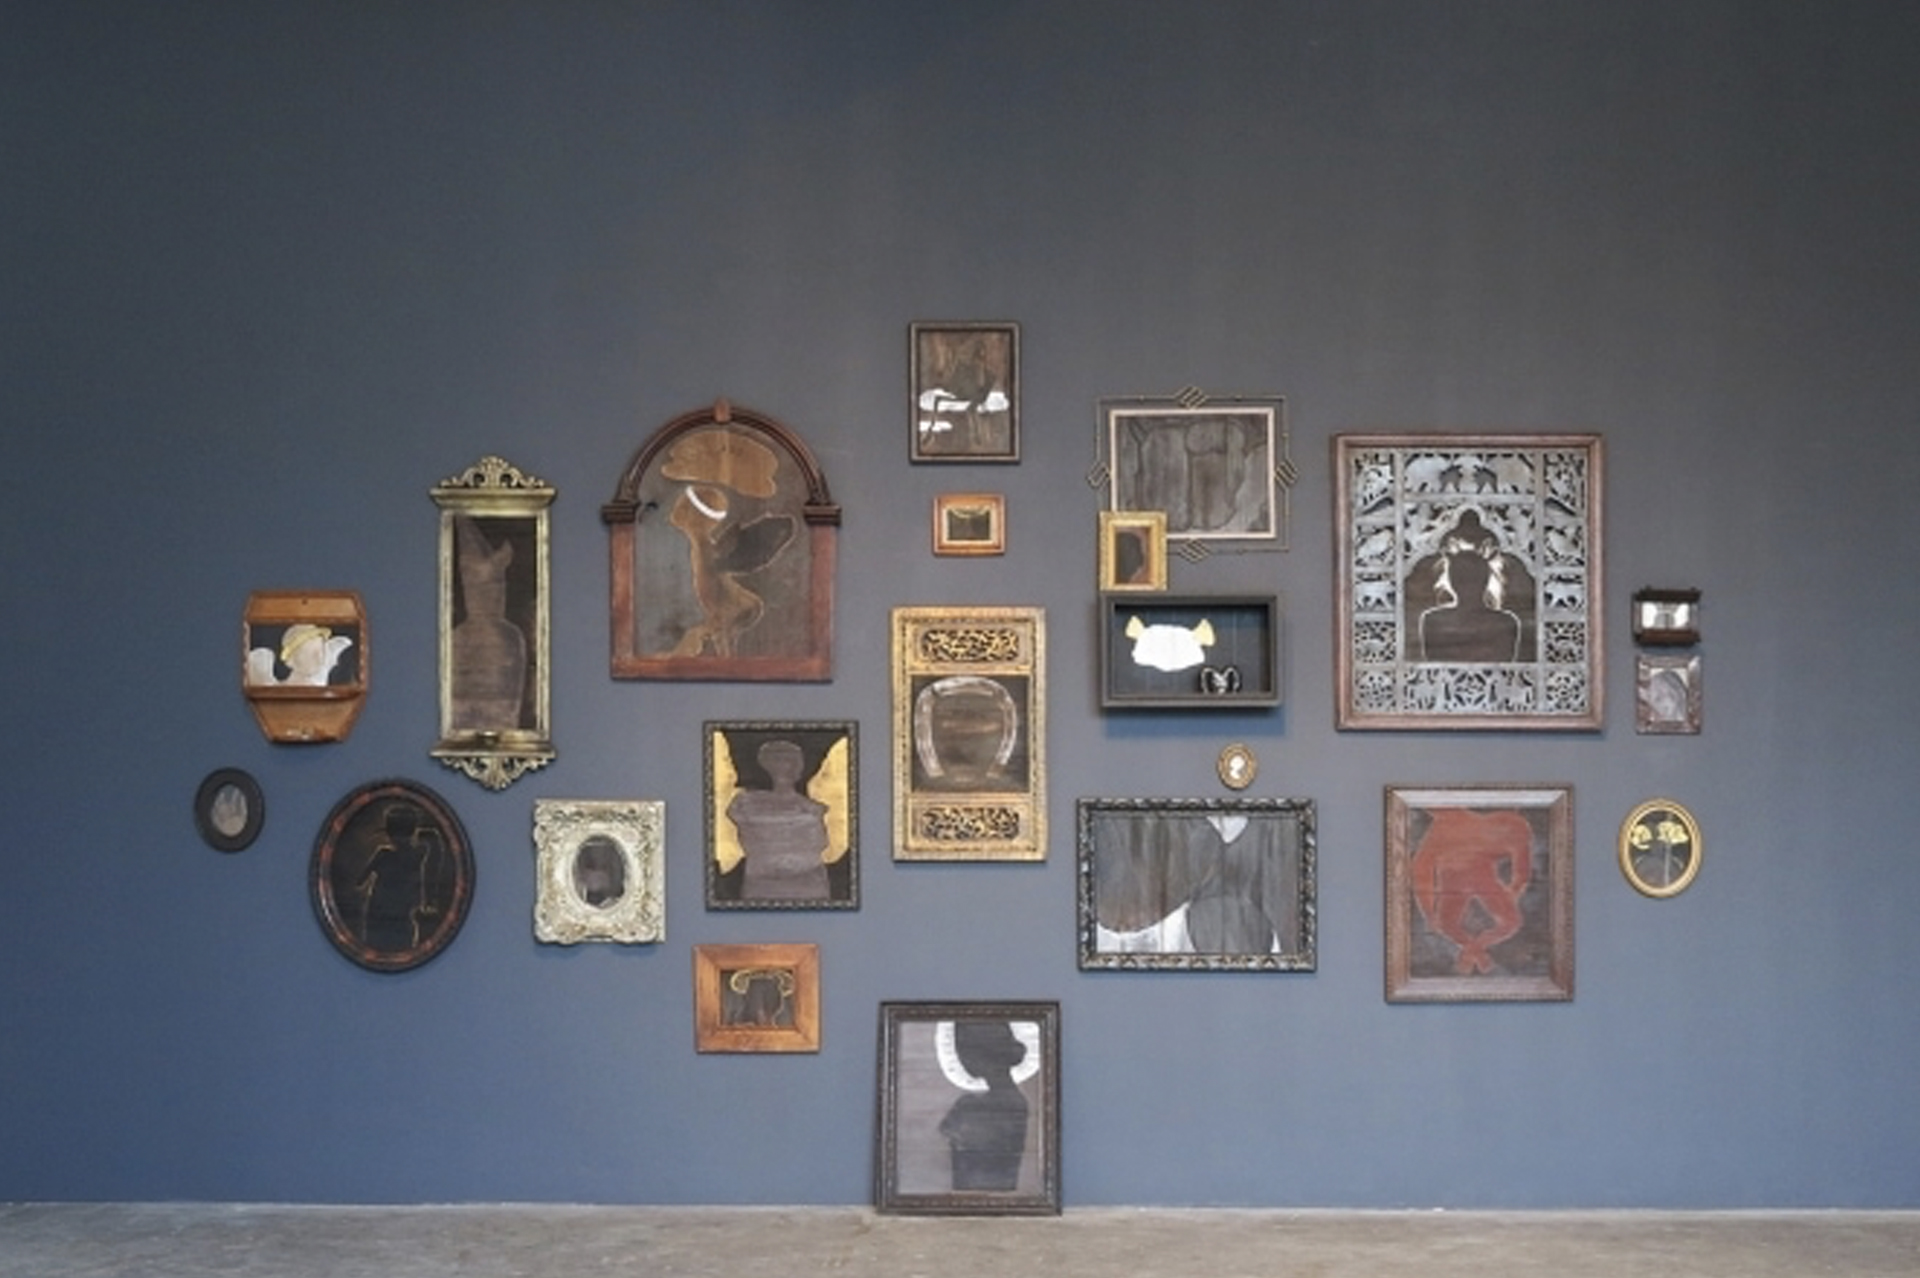 JUDITH WRIGHT, THE ANCESTORS, 2014, MIXED MEDIA INSTALLATION, DIMENSIONS VARIABLE